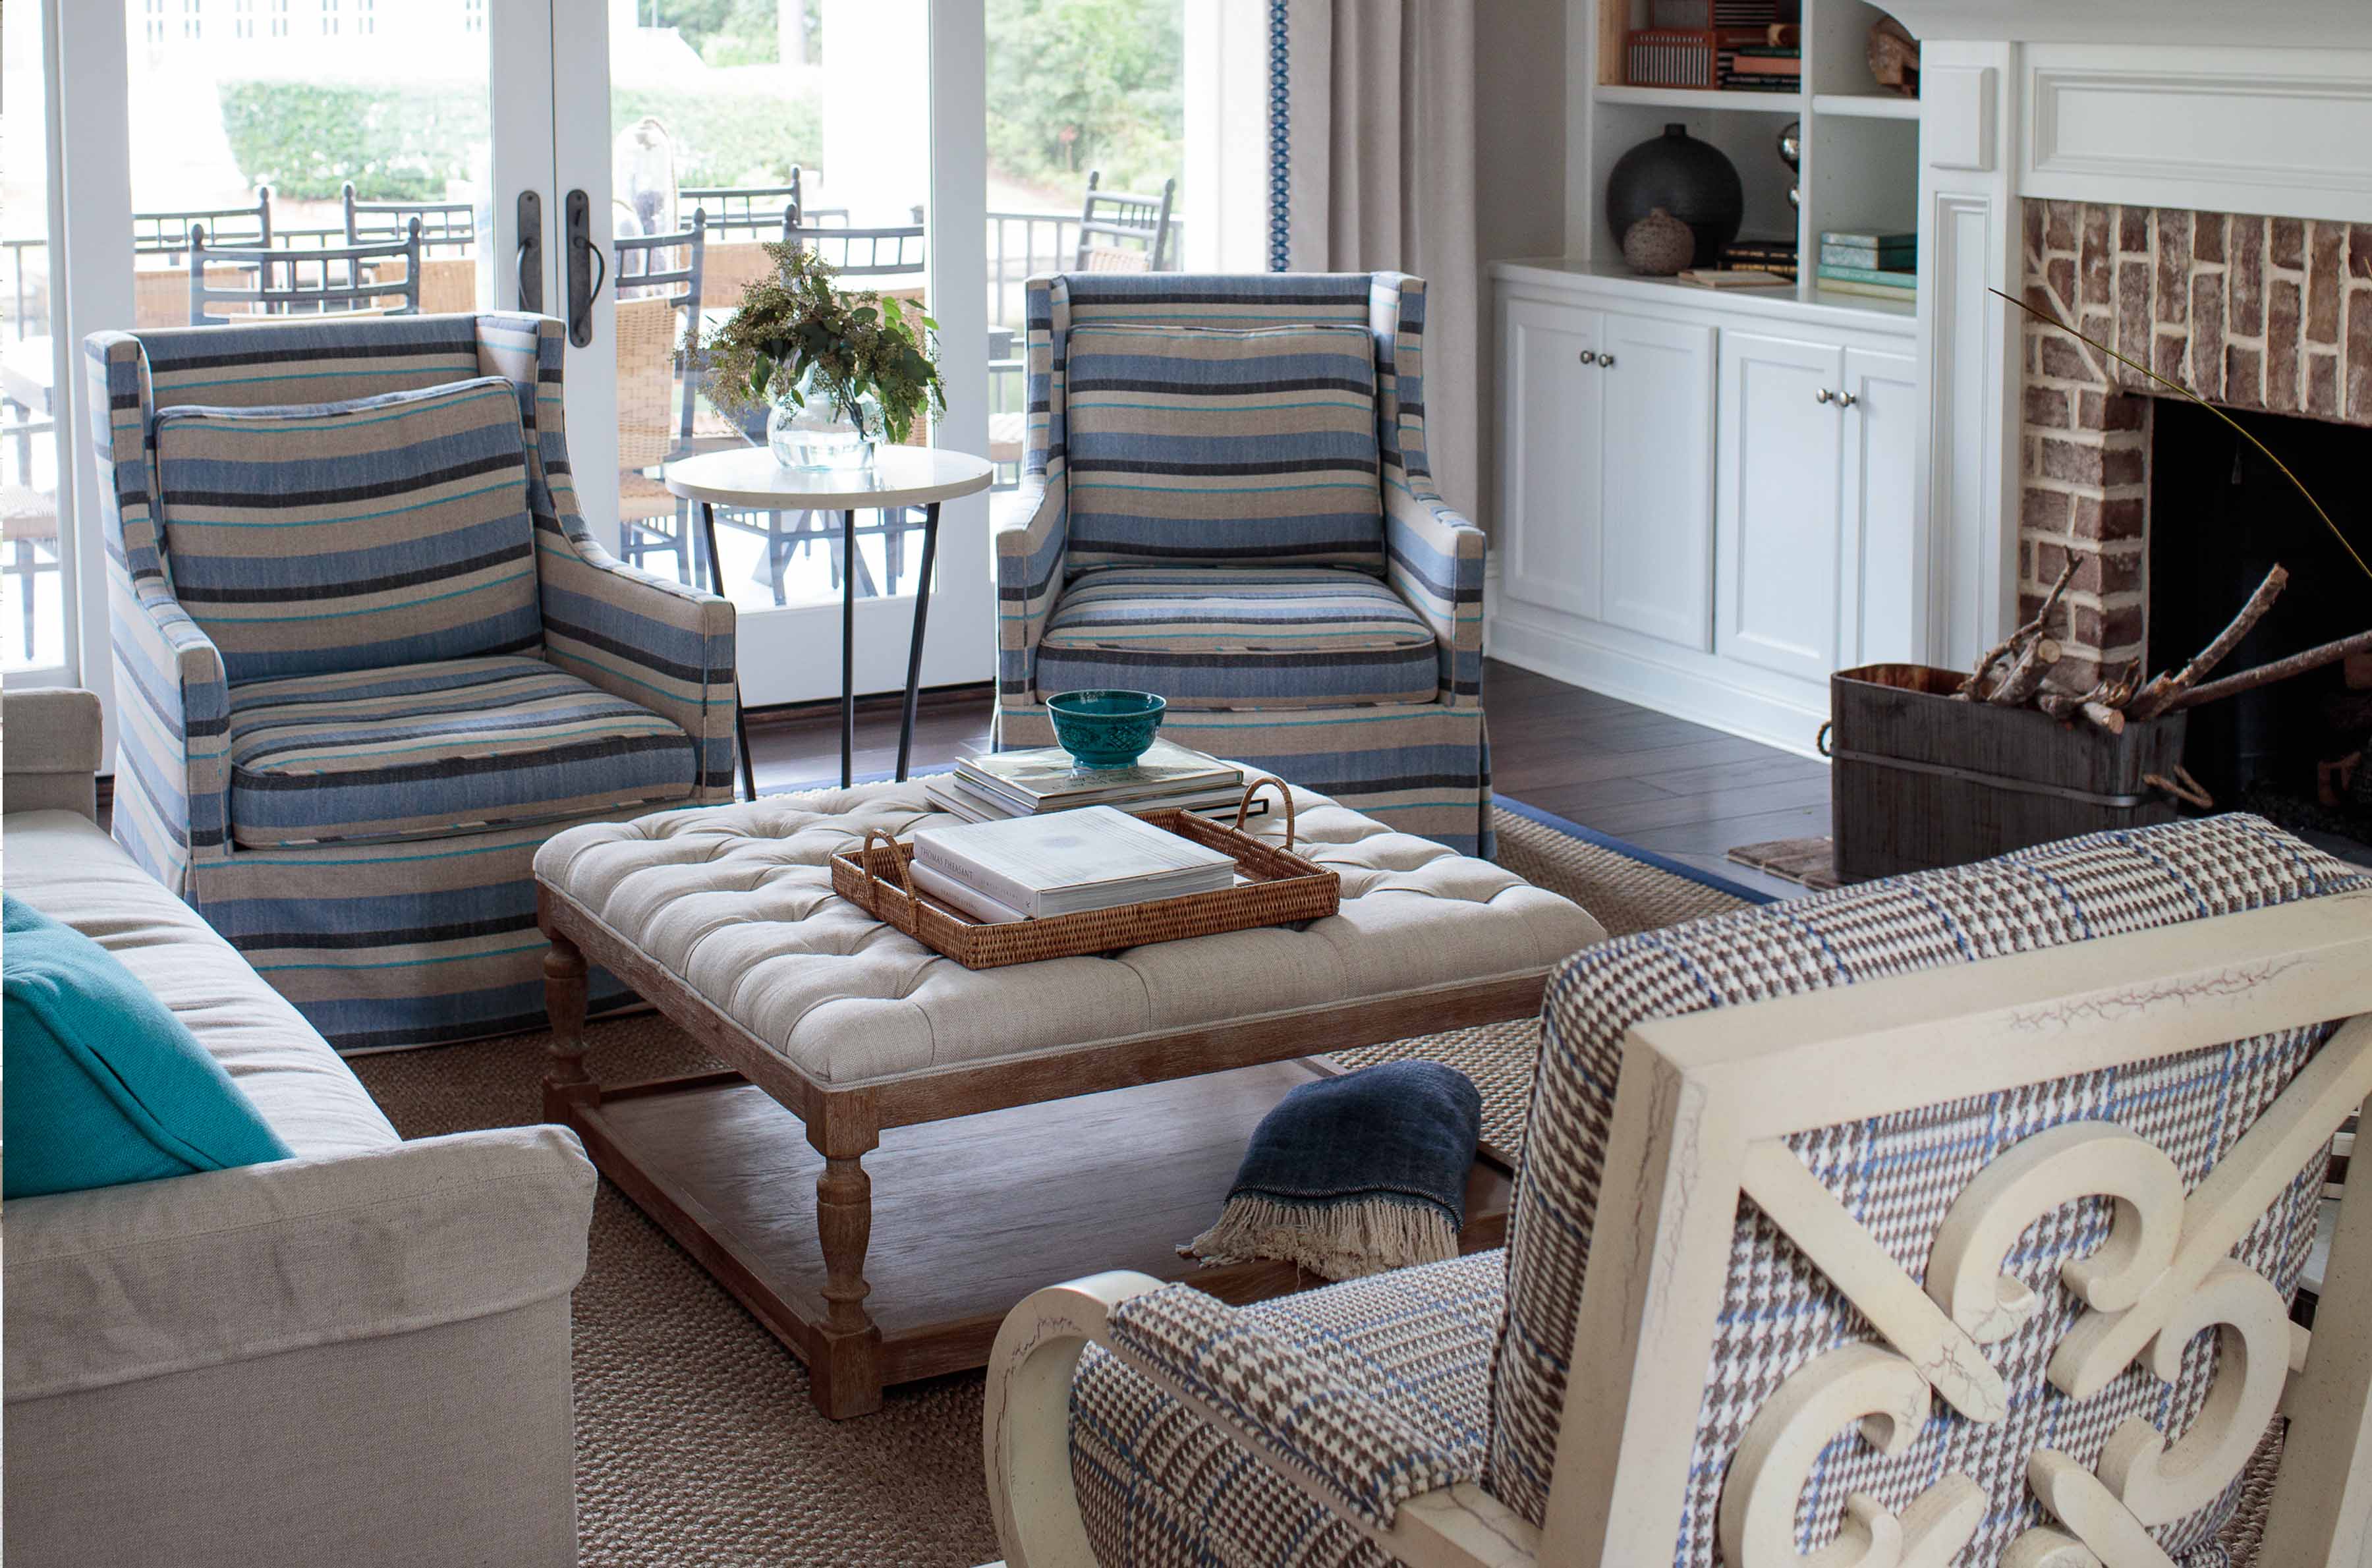 lowcountry interiors by the designers of the J Banks Design Group have a relaxed comfort for which the region is known